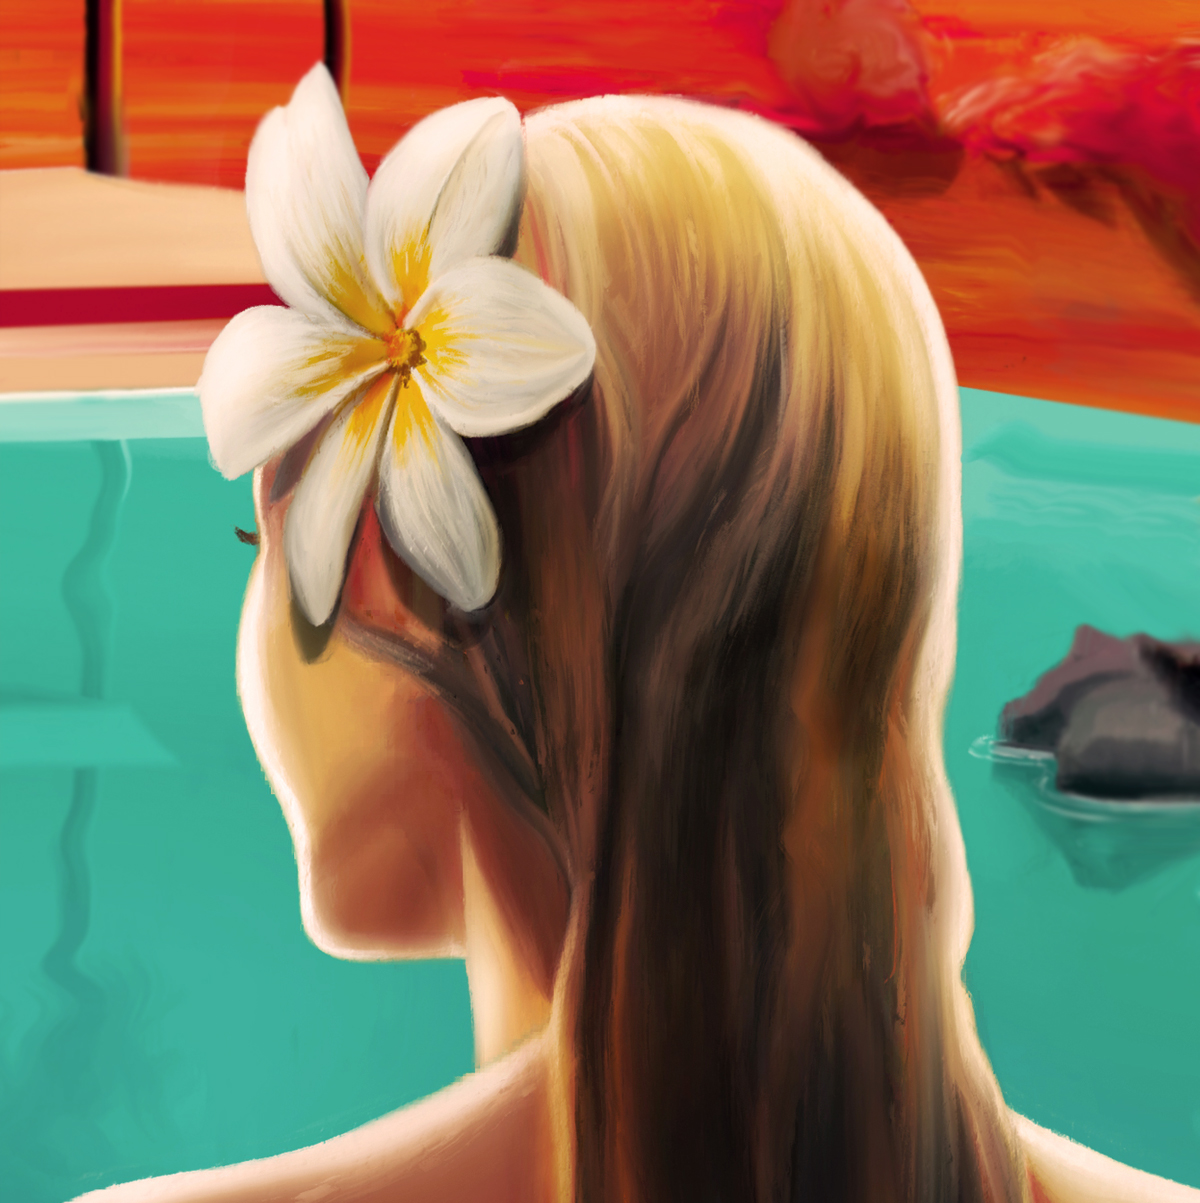 Between the Fountains - ORIGINAL PAINTING thumbnail